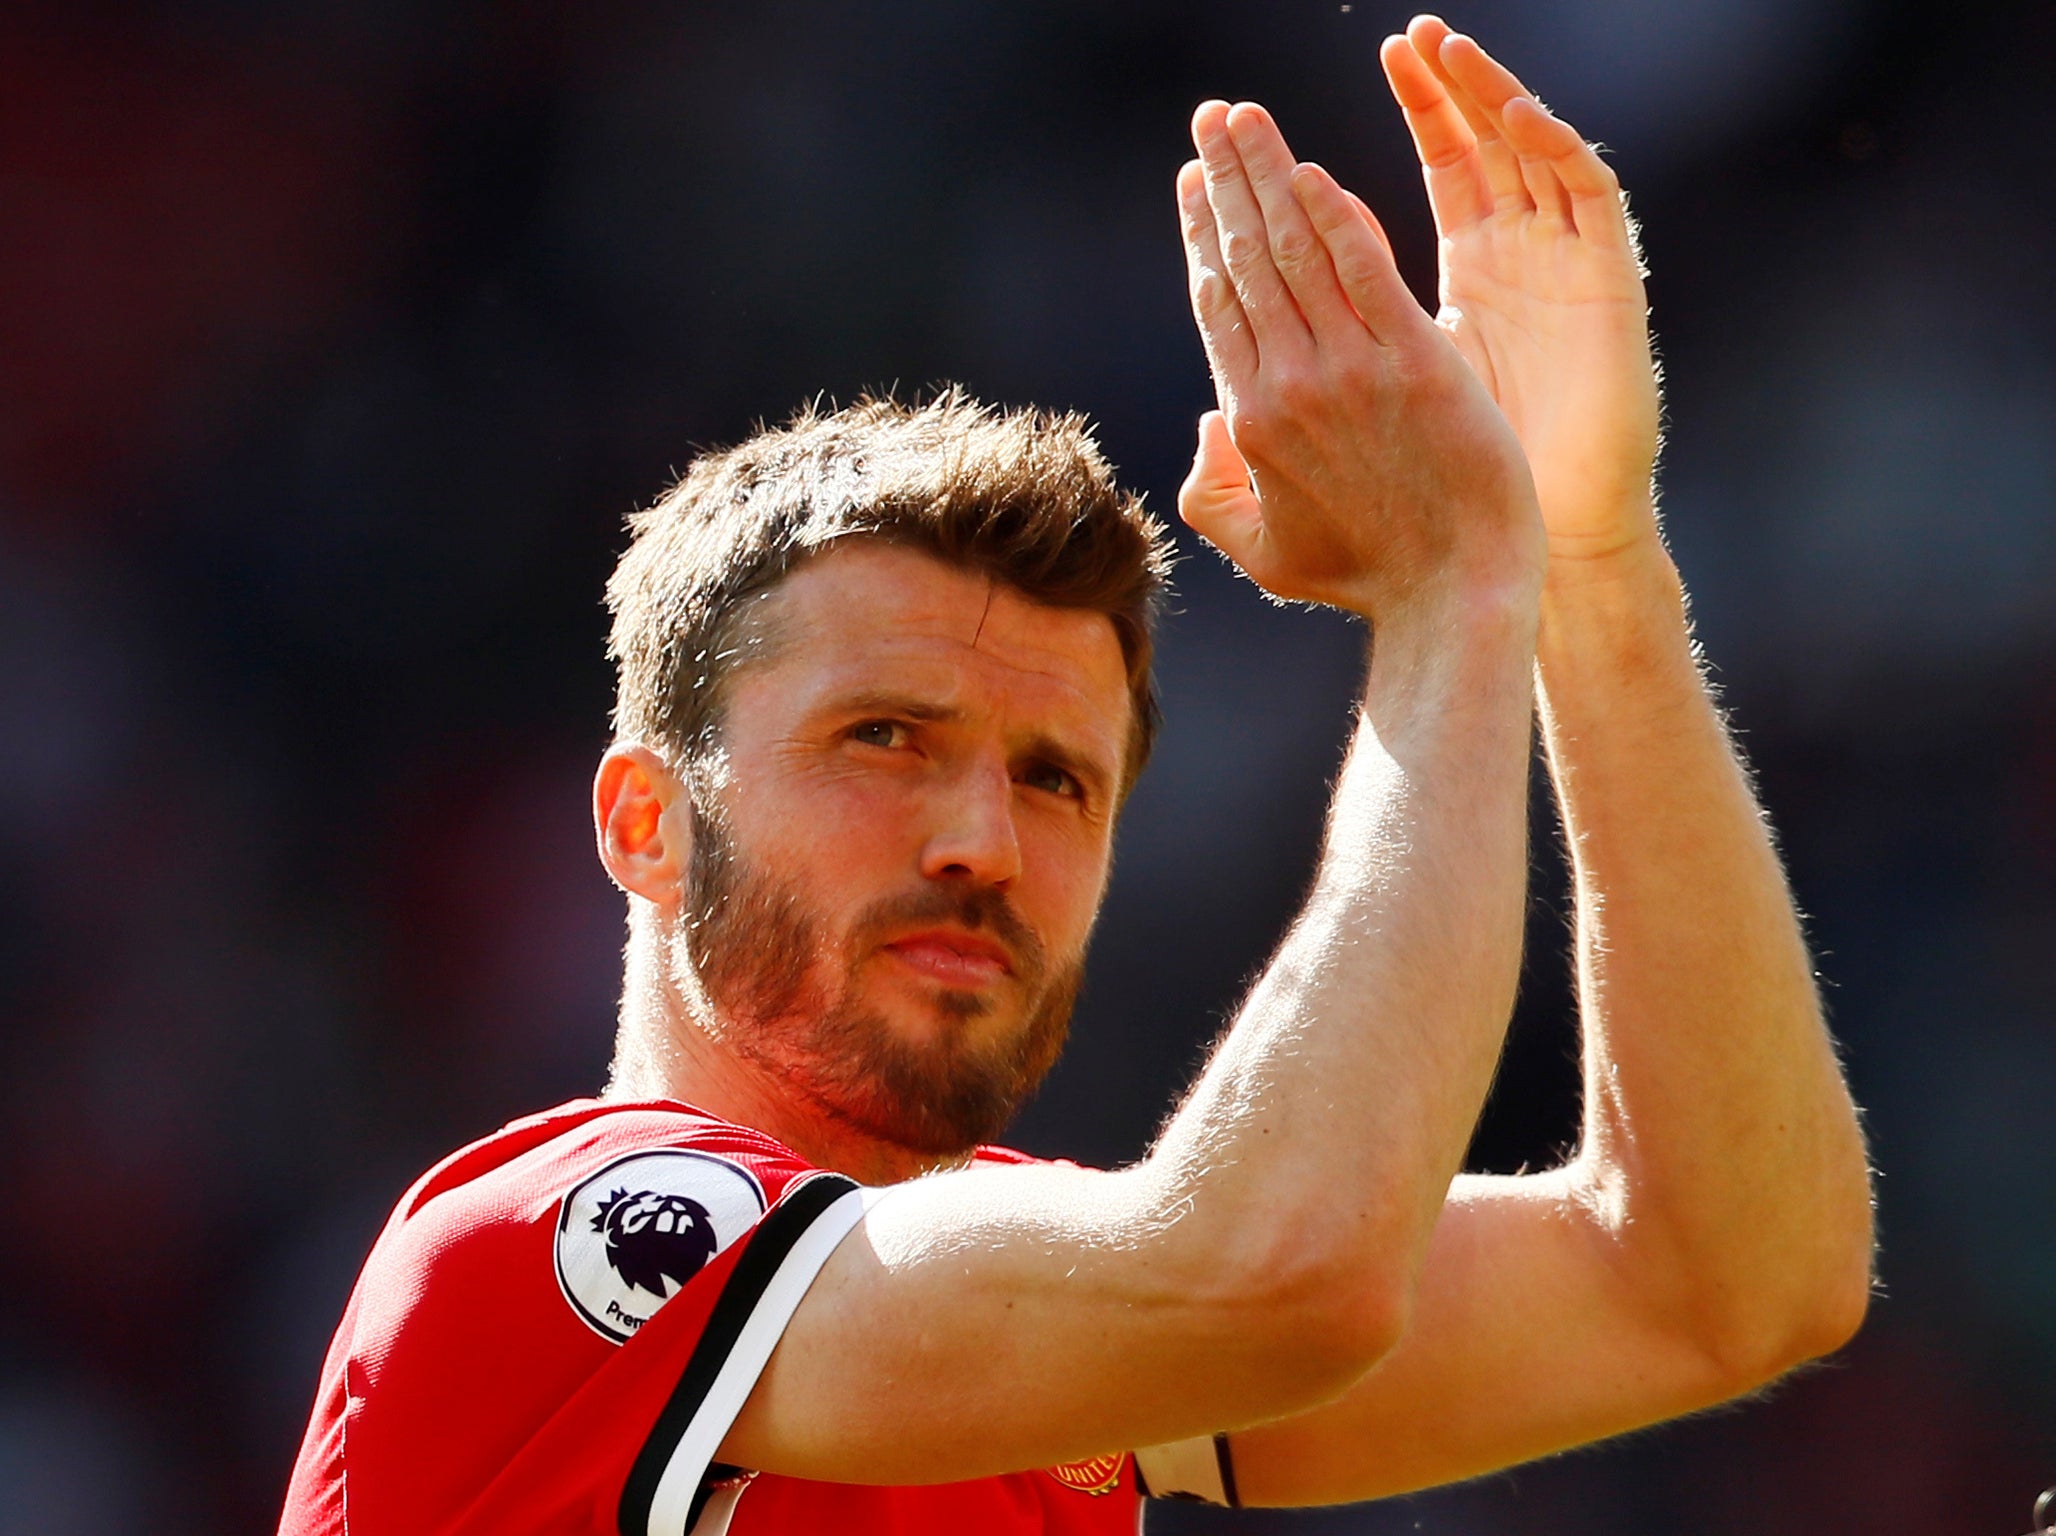 Michael Carrick became a key player for Manchester United